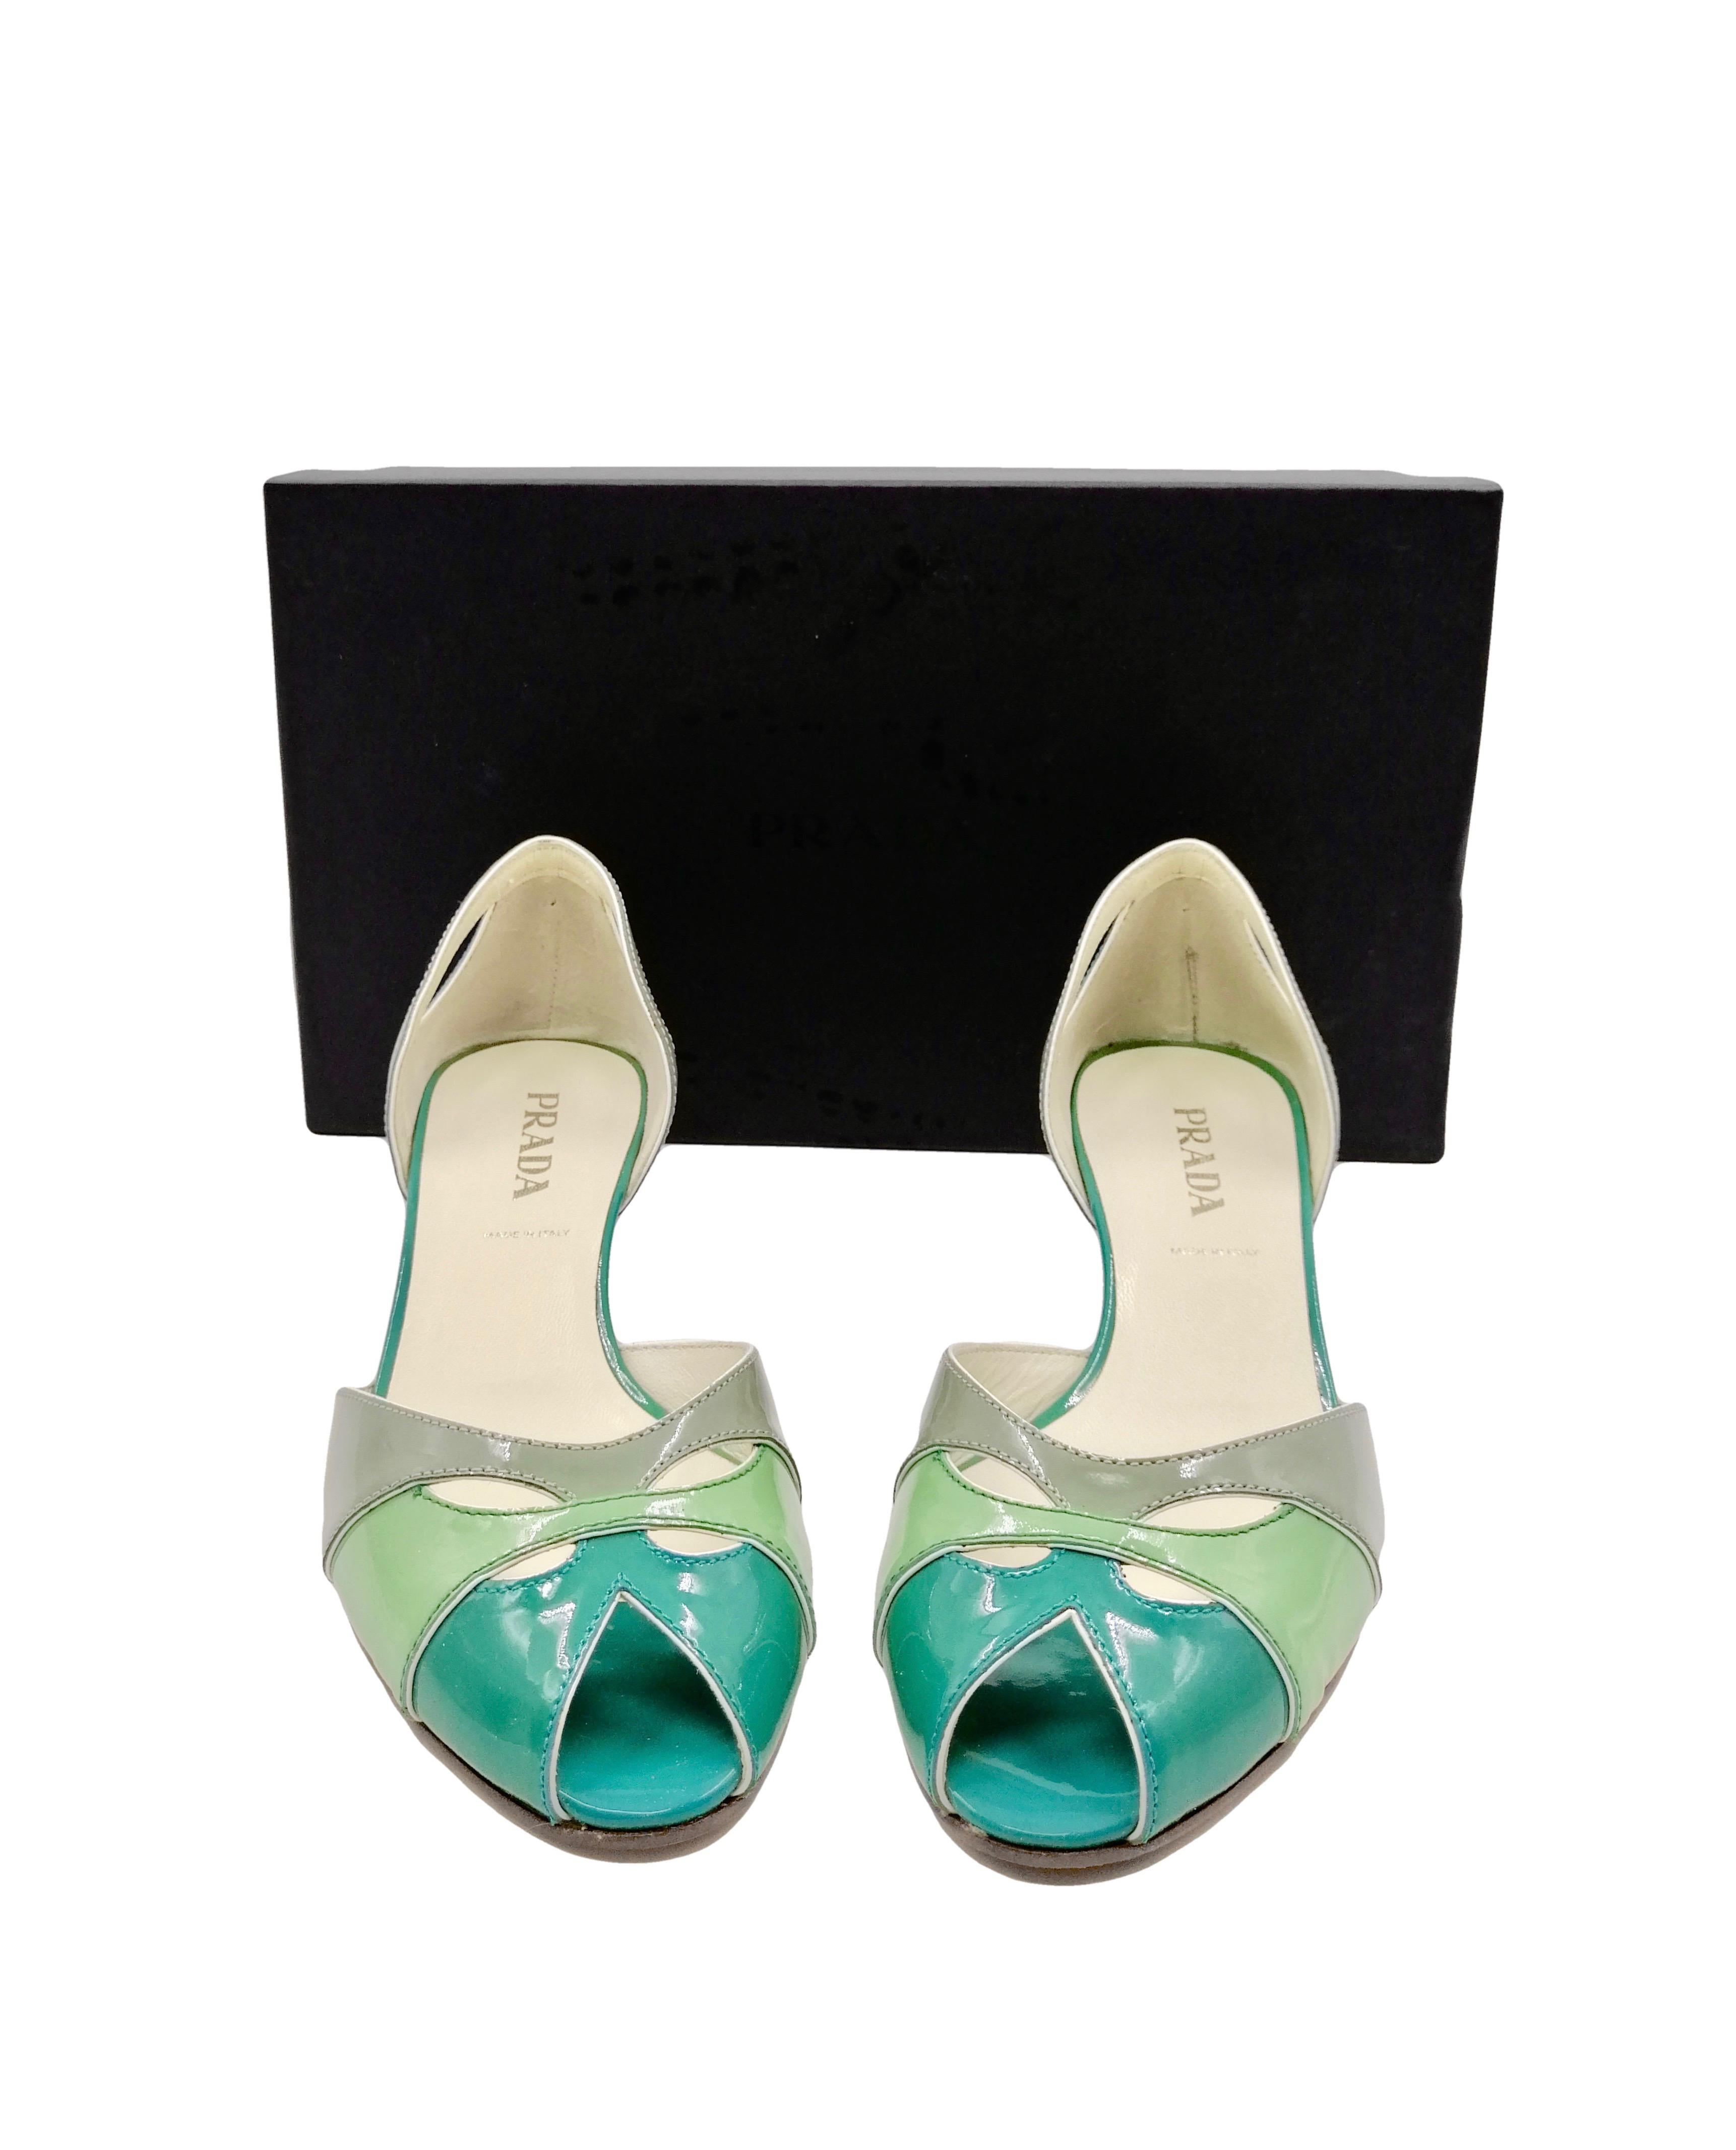 PRADA
Open-toe shoes in patent leather in the colors of turquoise, light green and light gray
Size IT 36
Heel cm. 3
Made in Italy
New with box